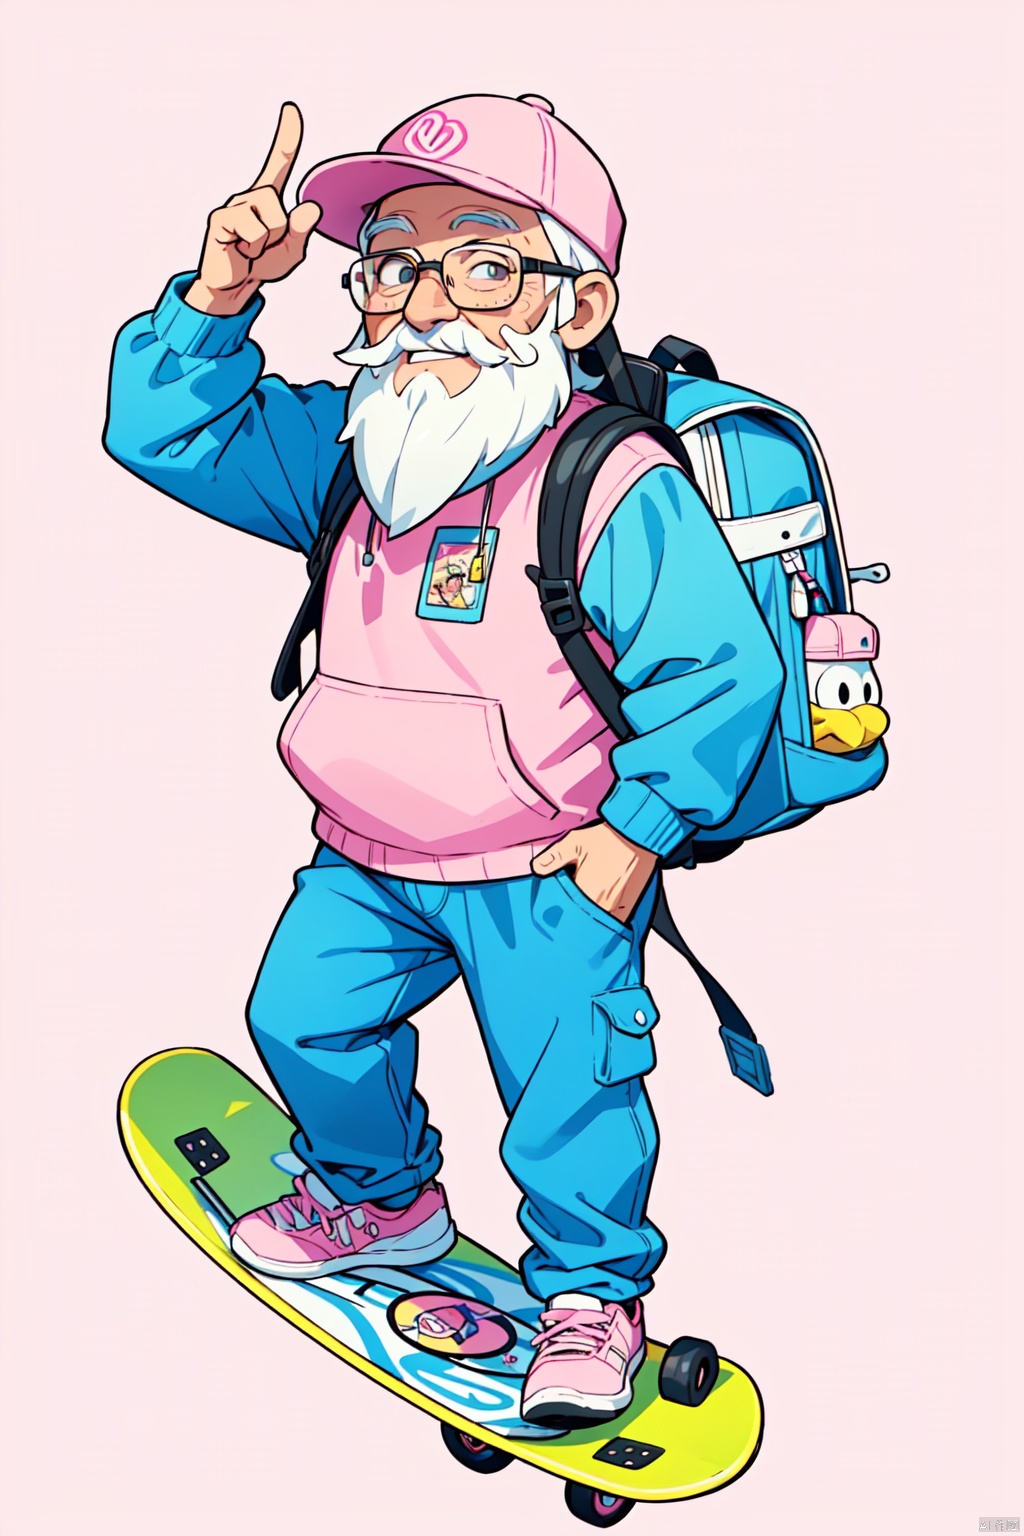 (masterpiece), (best quality),The image showcases a vibrant 3D animated character, an elderly man with a white beard, wearing a pink cap, glasses, and a backpack. He's posed next to a colorful skateboard, exuding a relaxed and adventurous vibe